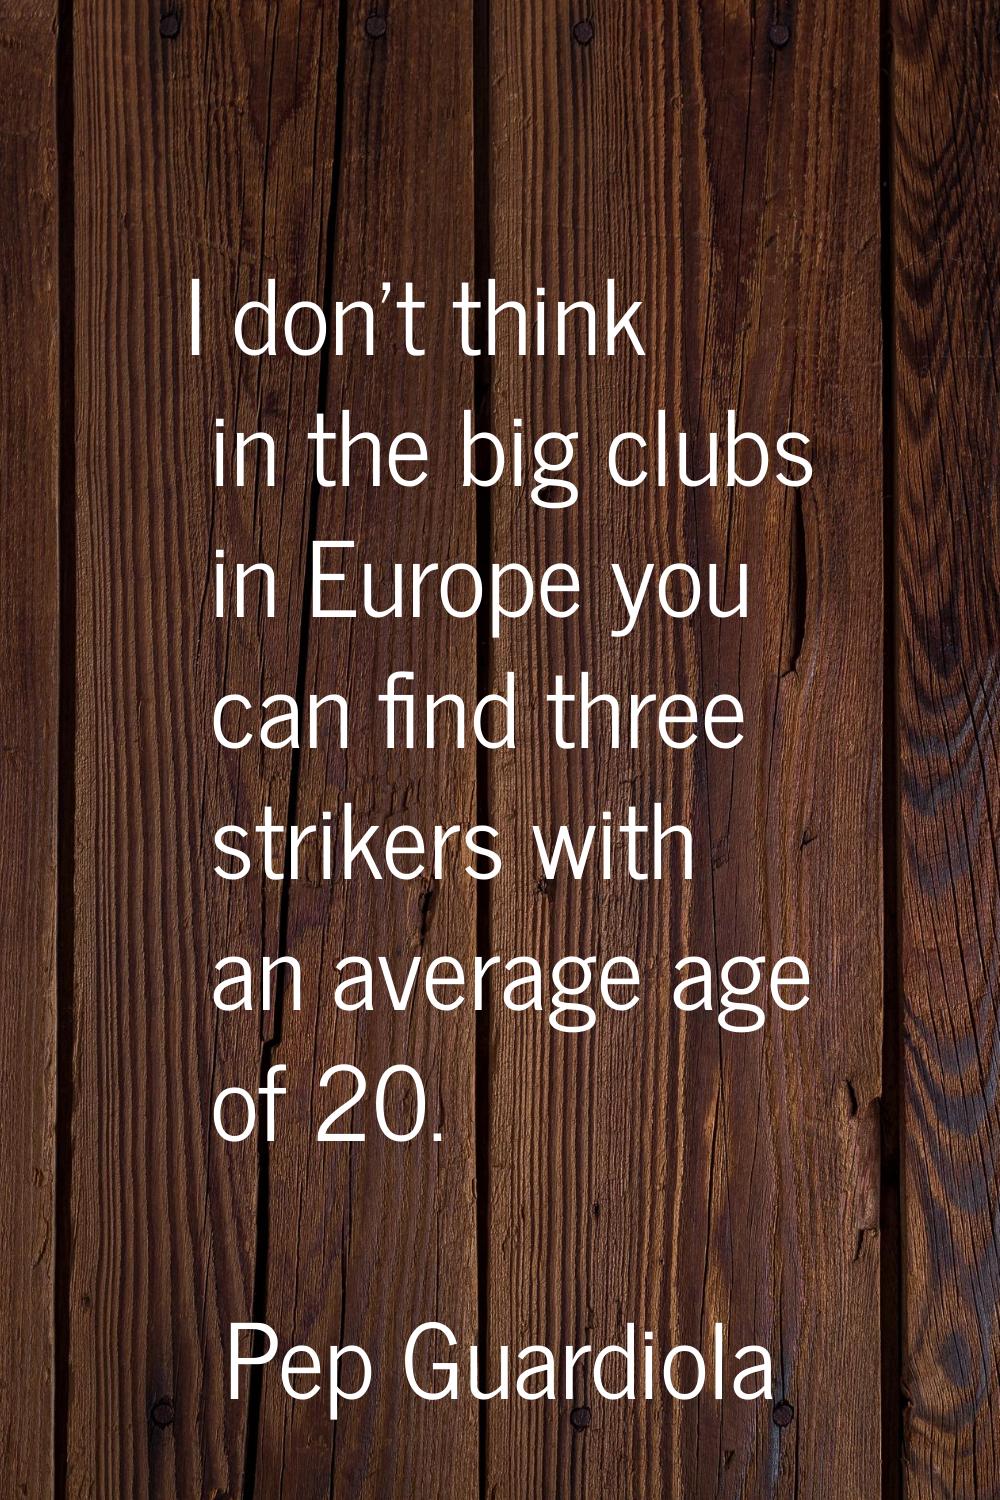 I don't think in the big clubs in Europe you can find three strikers with an average age of 20.